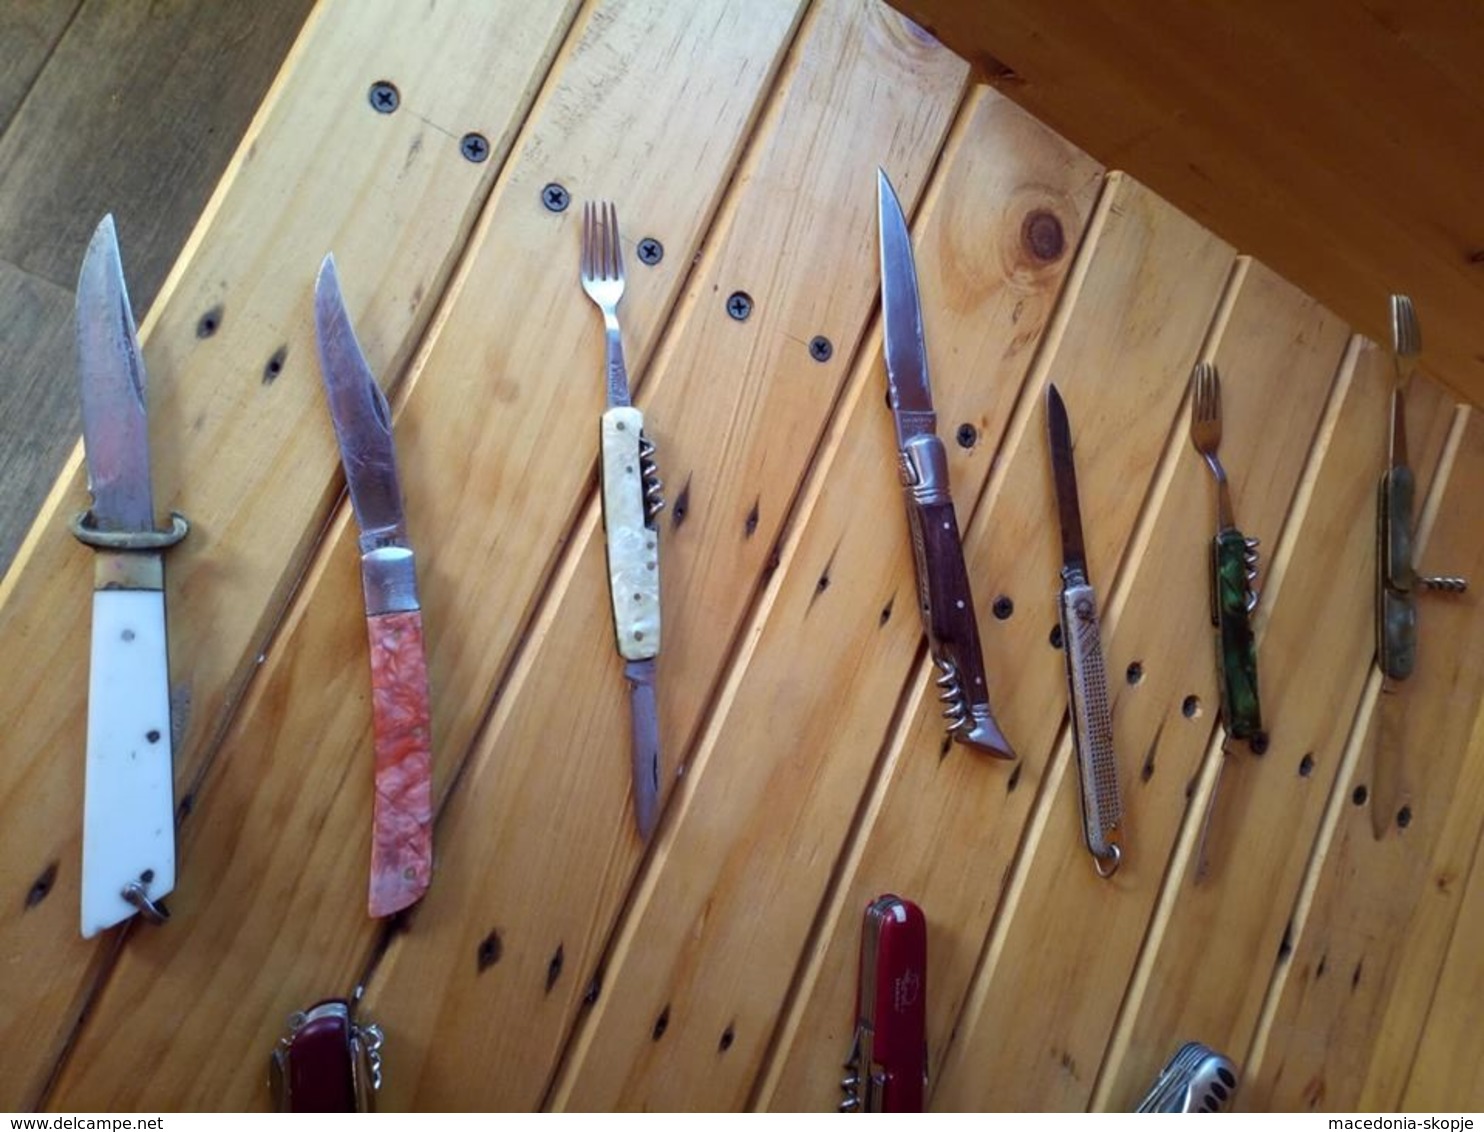 BIG LOT -Old  Pocket Knifes - Knives - Famous Brands- All Knives Are Right And Well Preserved. True Collector Samples - Messen